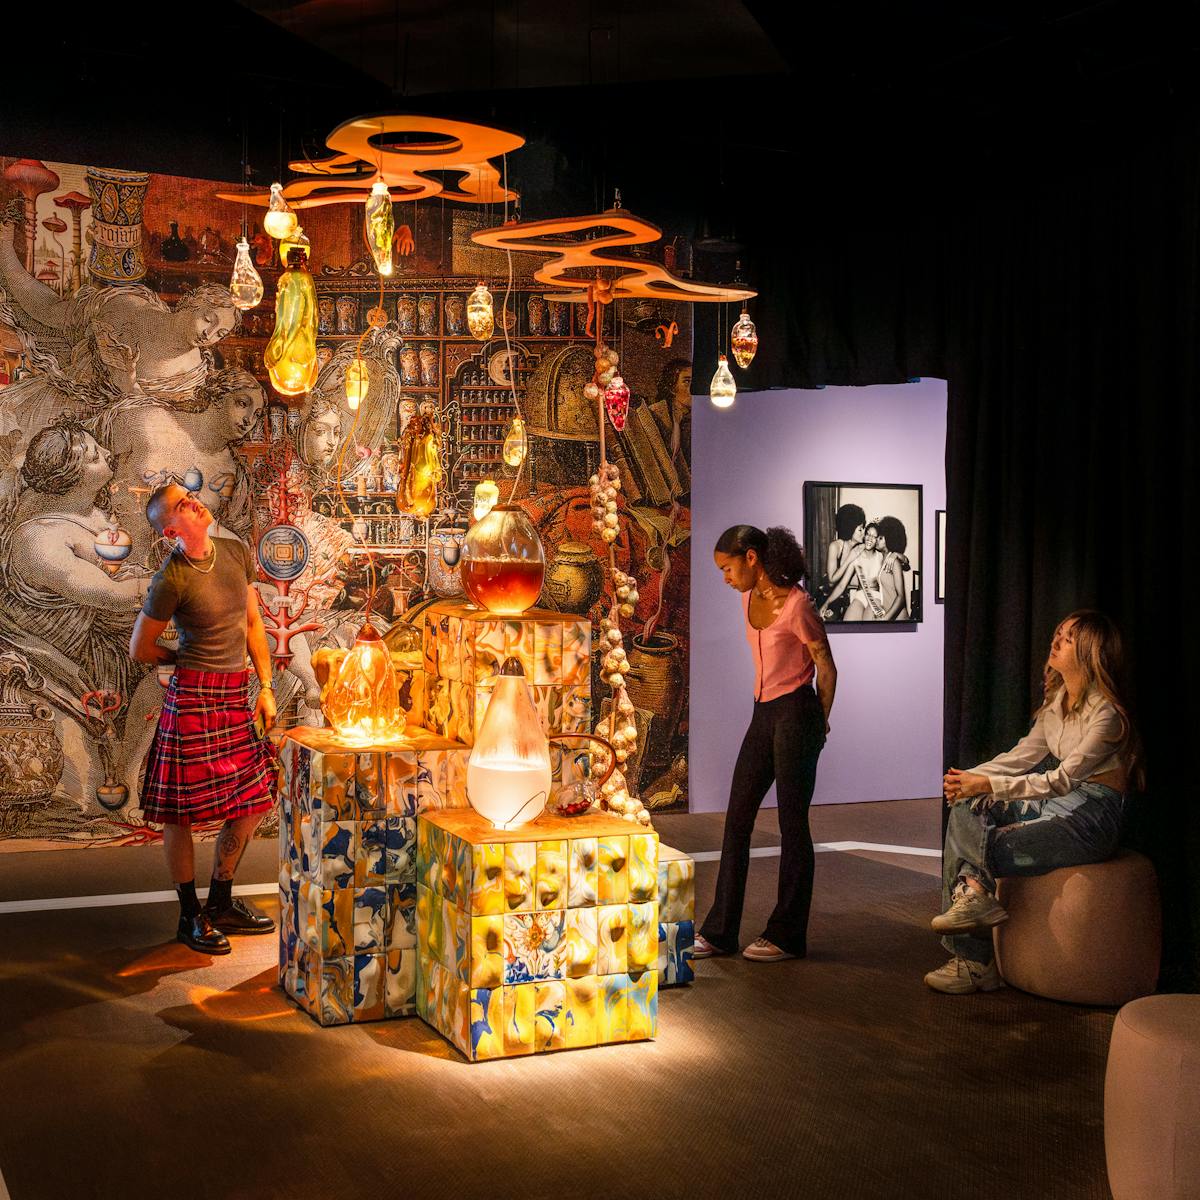 Photograph of 3 gallery visitors looking at an installation. At the centre is multi-levelled podium covered in ornate coloured tiles. Resting on the defaces and suspended above are organically shaped glass vessels containing coloured liquid and natural substances. The wall behind in covered in renaissance images. The whole scene is dark but warmly lit.